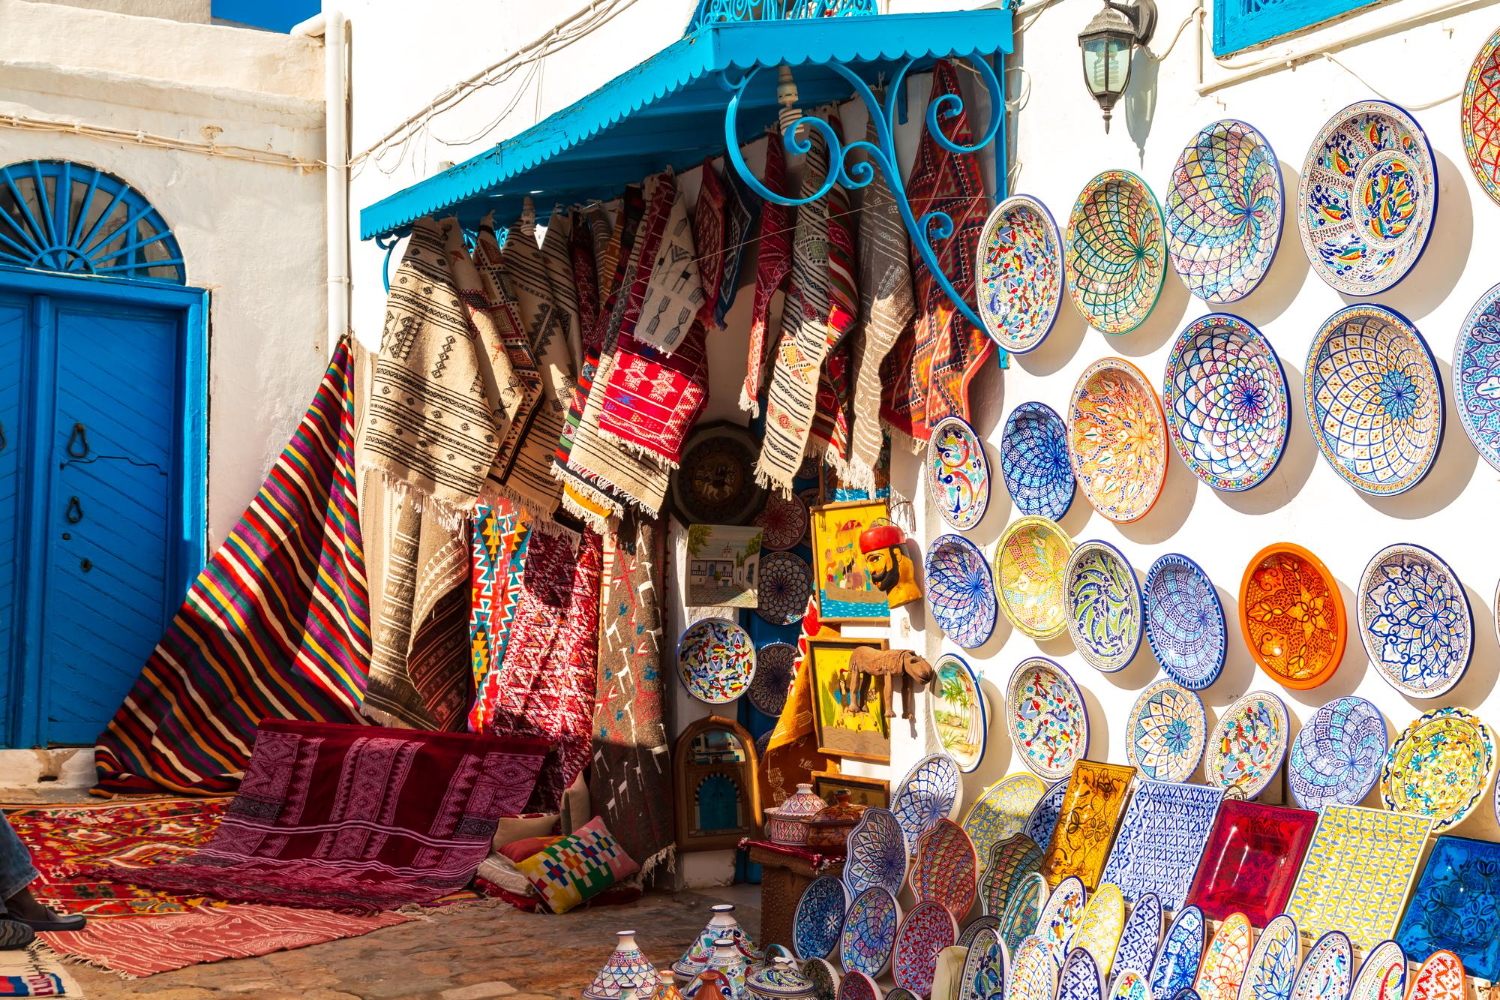 Immersive experiences with Moroccan locals